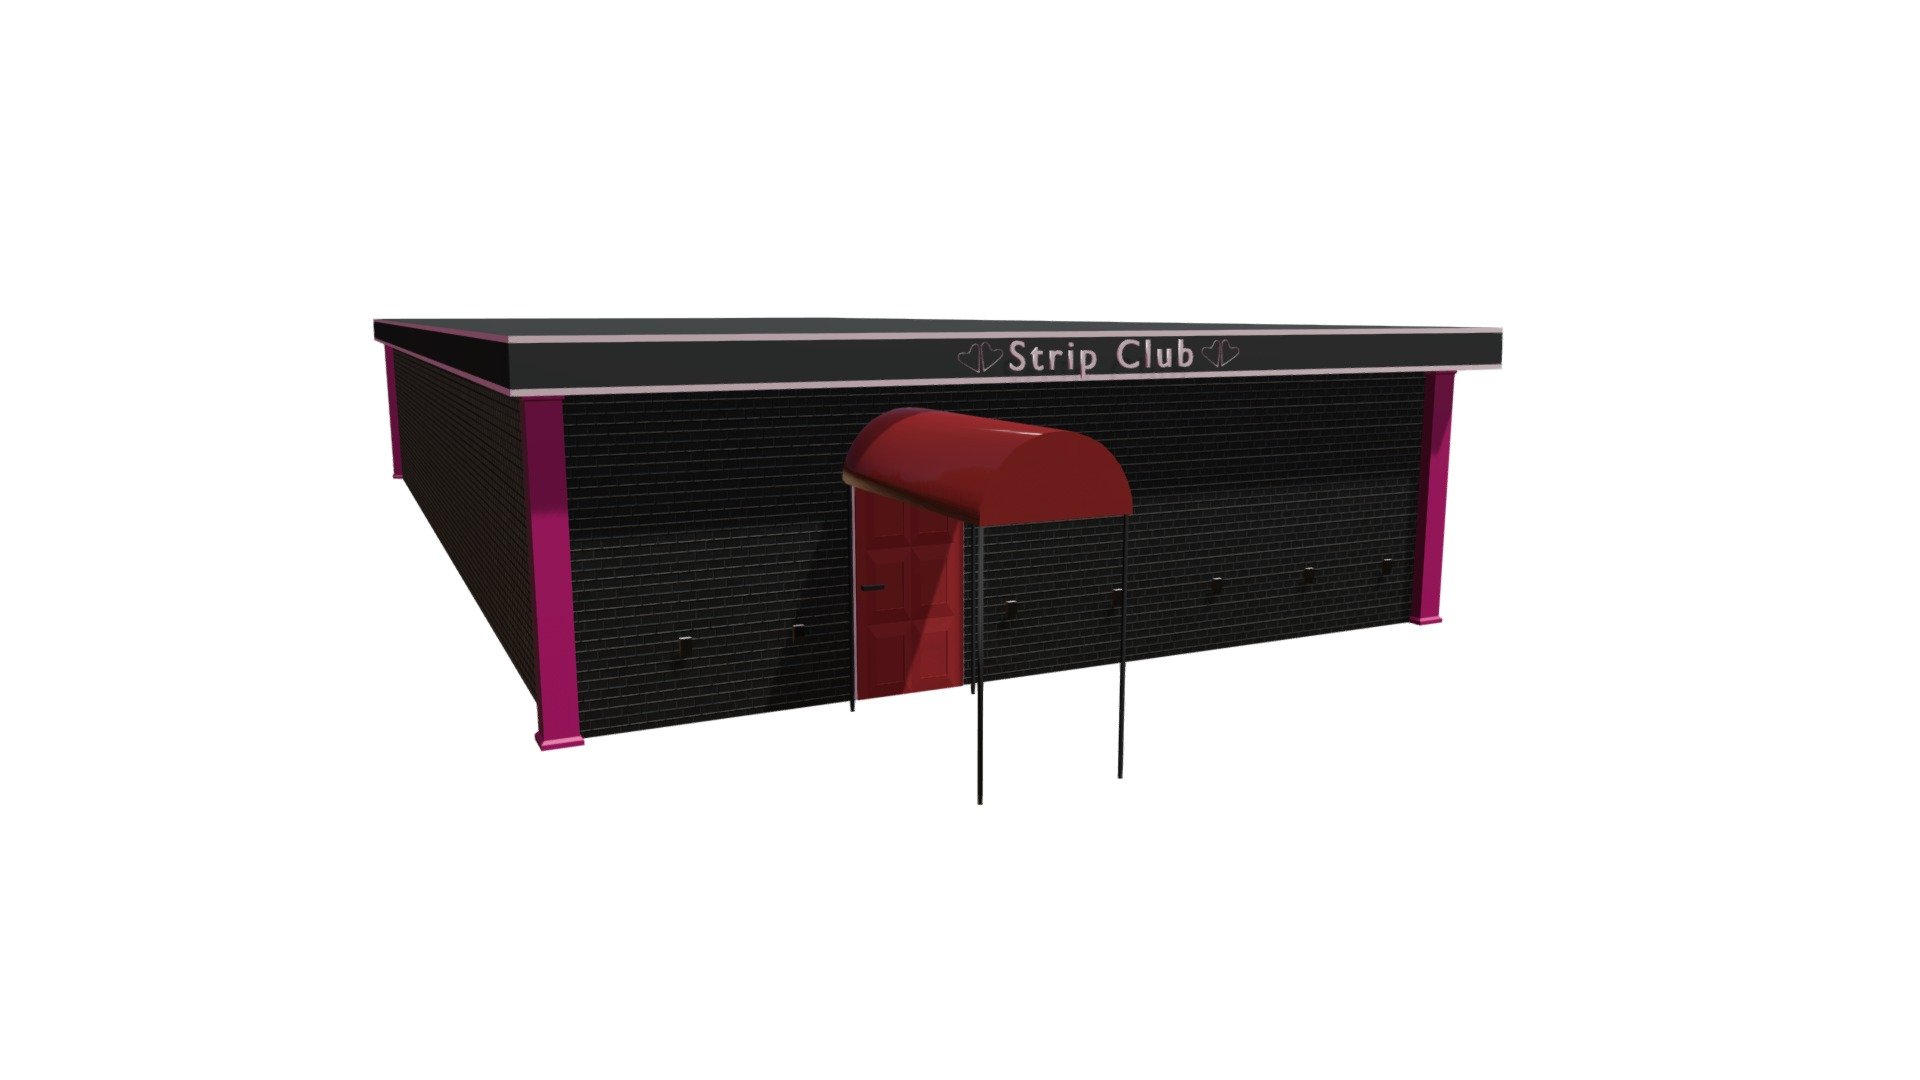 3D model of Strip club Exterior

Made in Blender.

Textures and materials included

Every Object is UV-unwrapped

There is no nudity in this model



A strip club is a venue where strippers provide adult entertainment, predominantly in the form of striptease or other erotic dances. Strip clubs typically adopt a nightclub or bar style, and can also adopt a theatre or cabaret-style 3d model